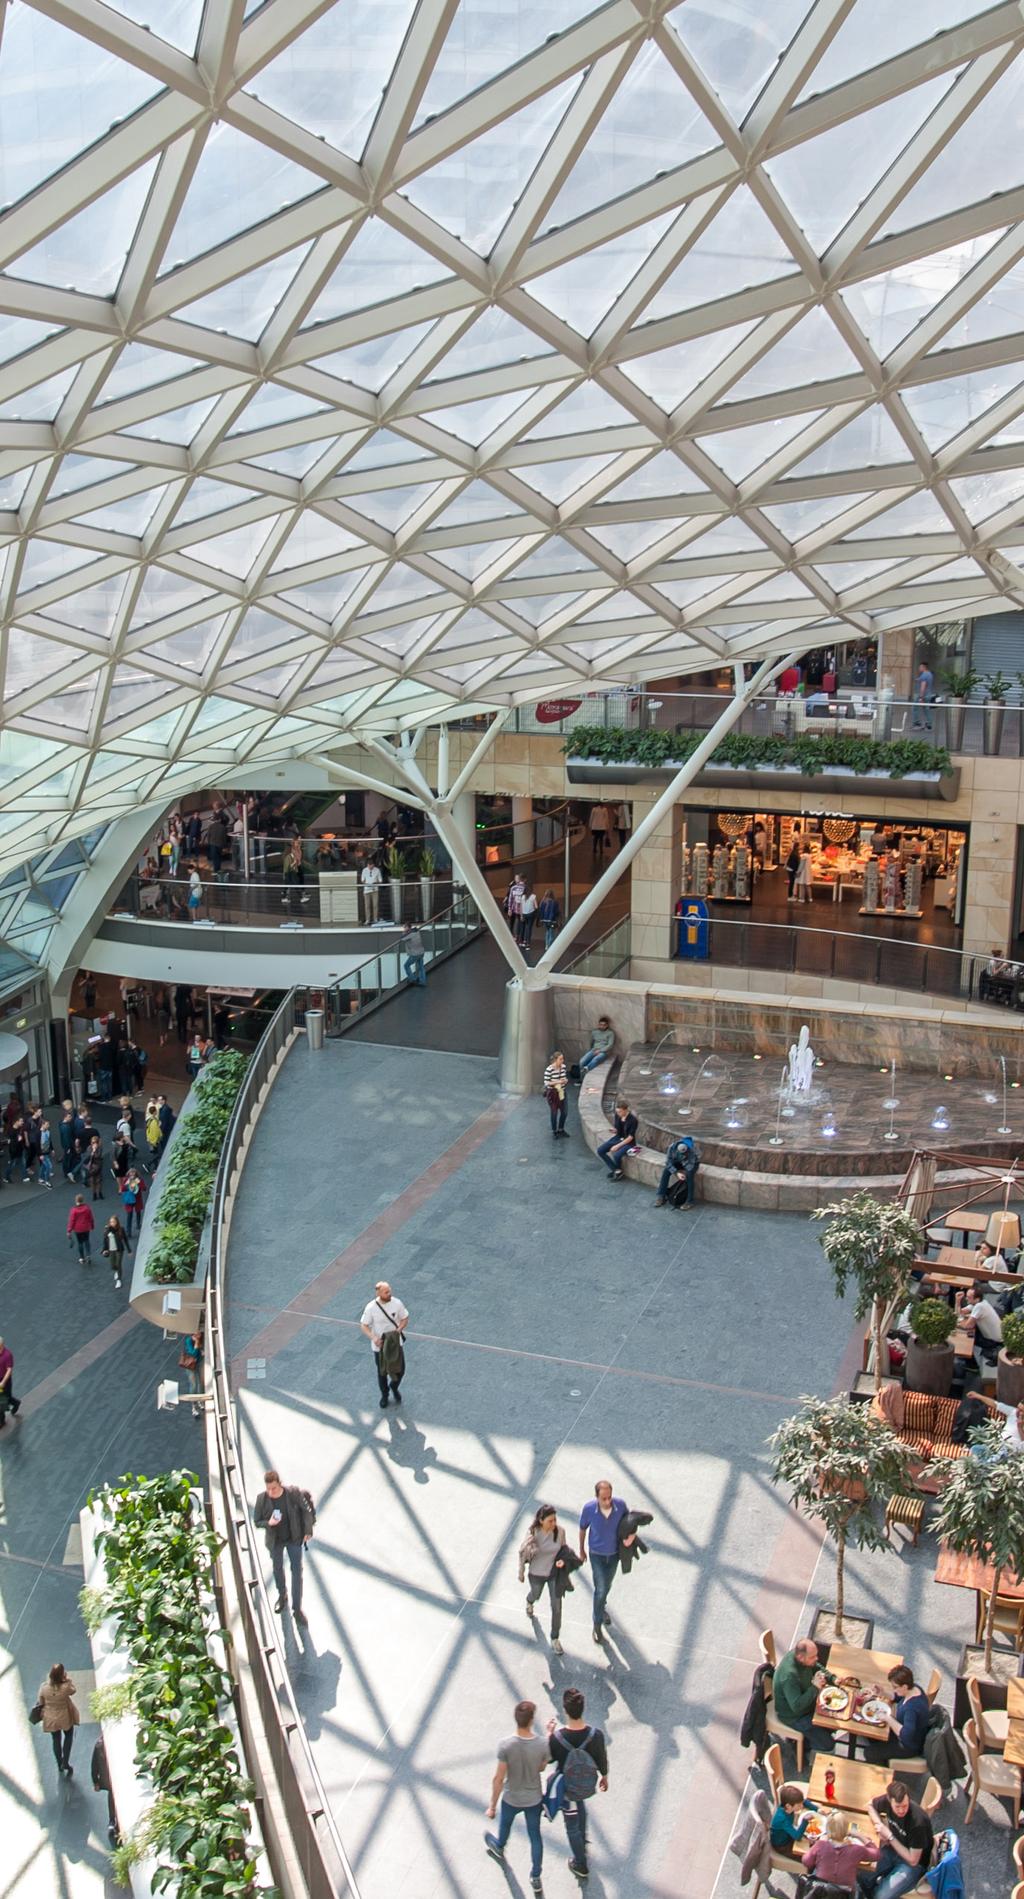 OUR RETAIL SERVICES OUR RETAIL TEAM PROVIDES SERVICES FOR RETAIL AND LEISURE OCCUPIERS, LANDLORDS AND S, AND MARKETS RETAIL PROPERTIES ON A LOCAL AND GLOBAL BASIS. ZESPÓŁ DS.